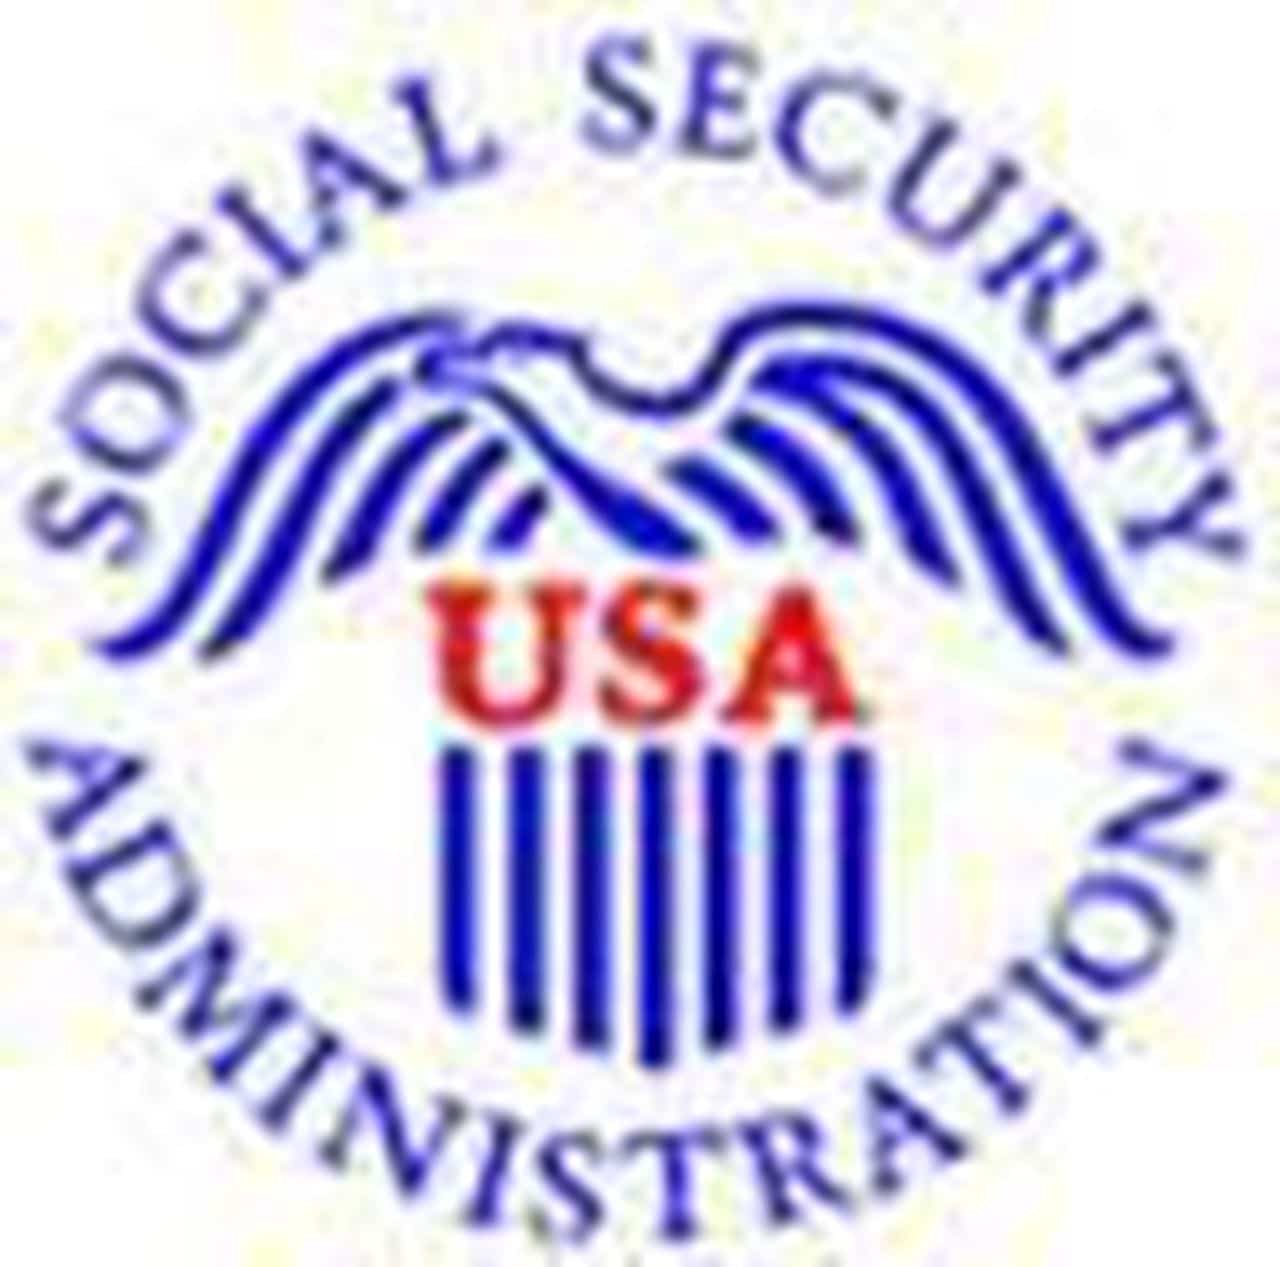 Grand Rapids Social Security office cuts hours